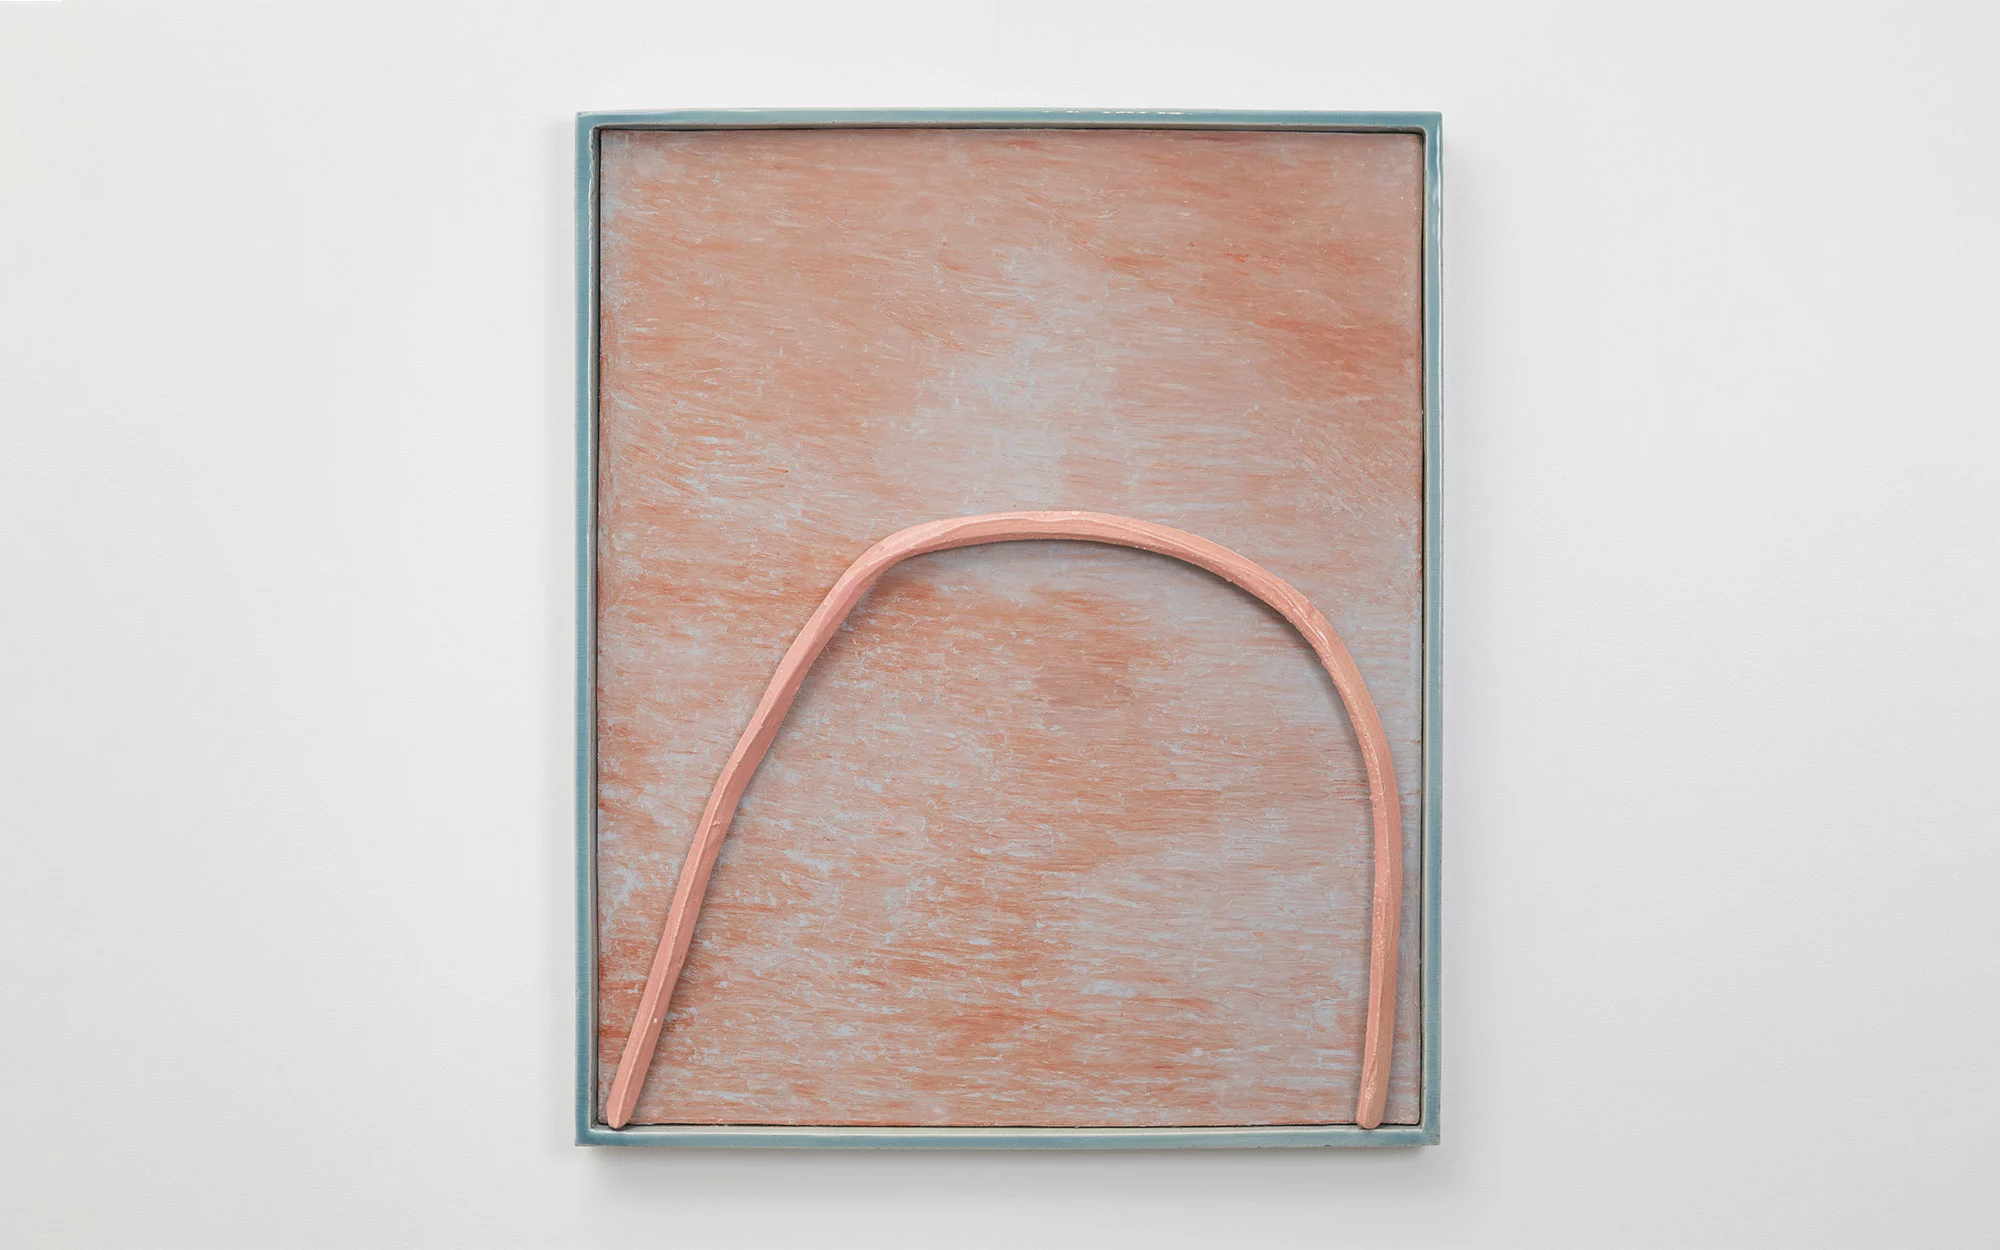 Bas-Relief OTHER SIZES - Ronan Bouroullec - Ronan Bouroullec, rhinoceros gallery.